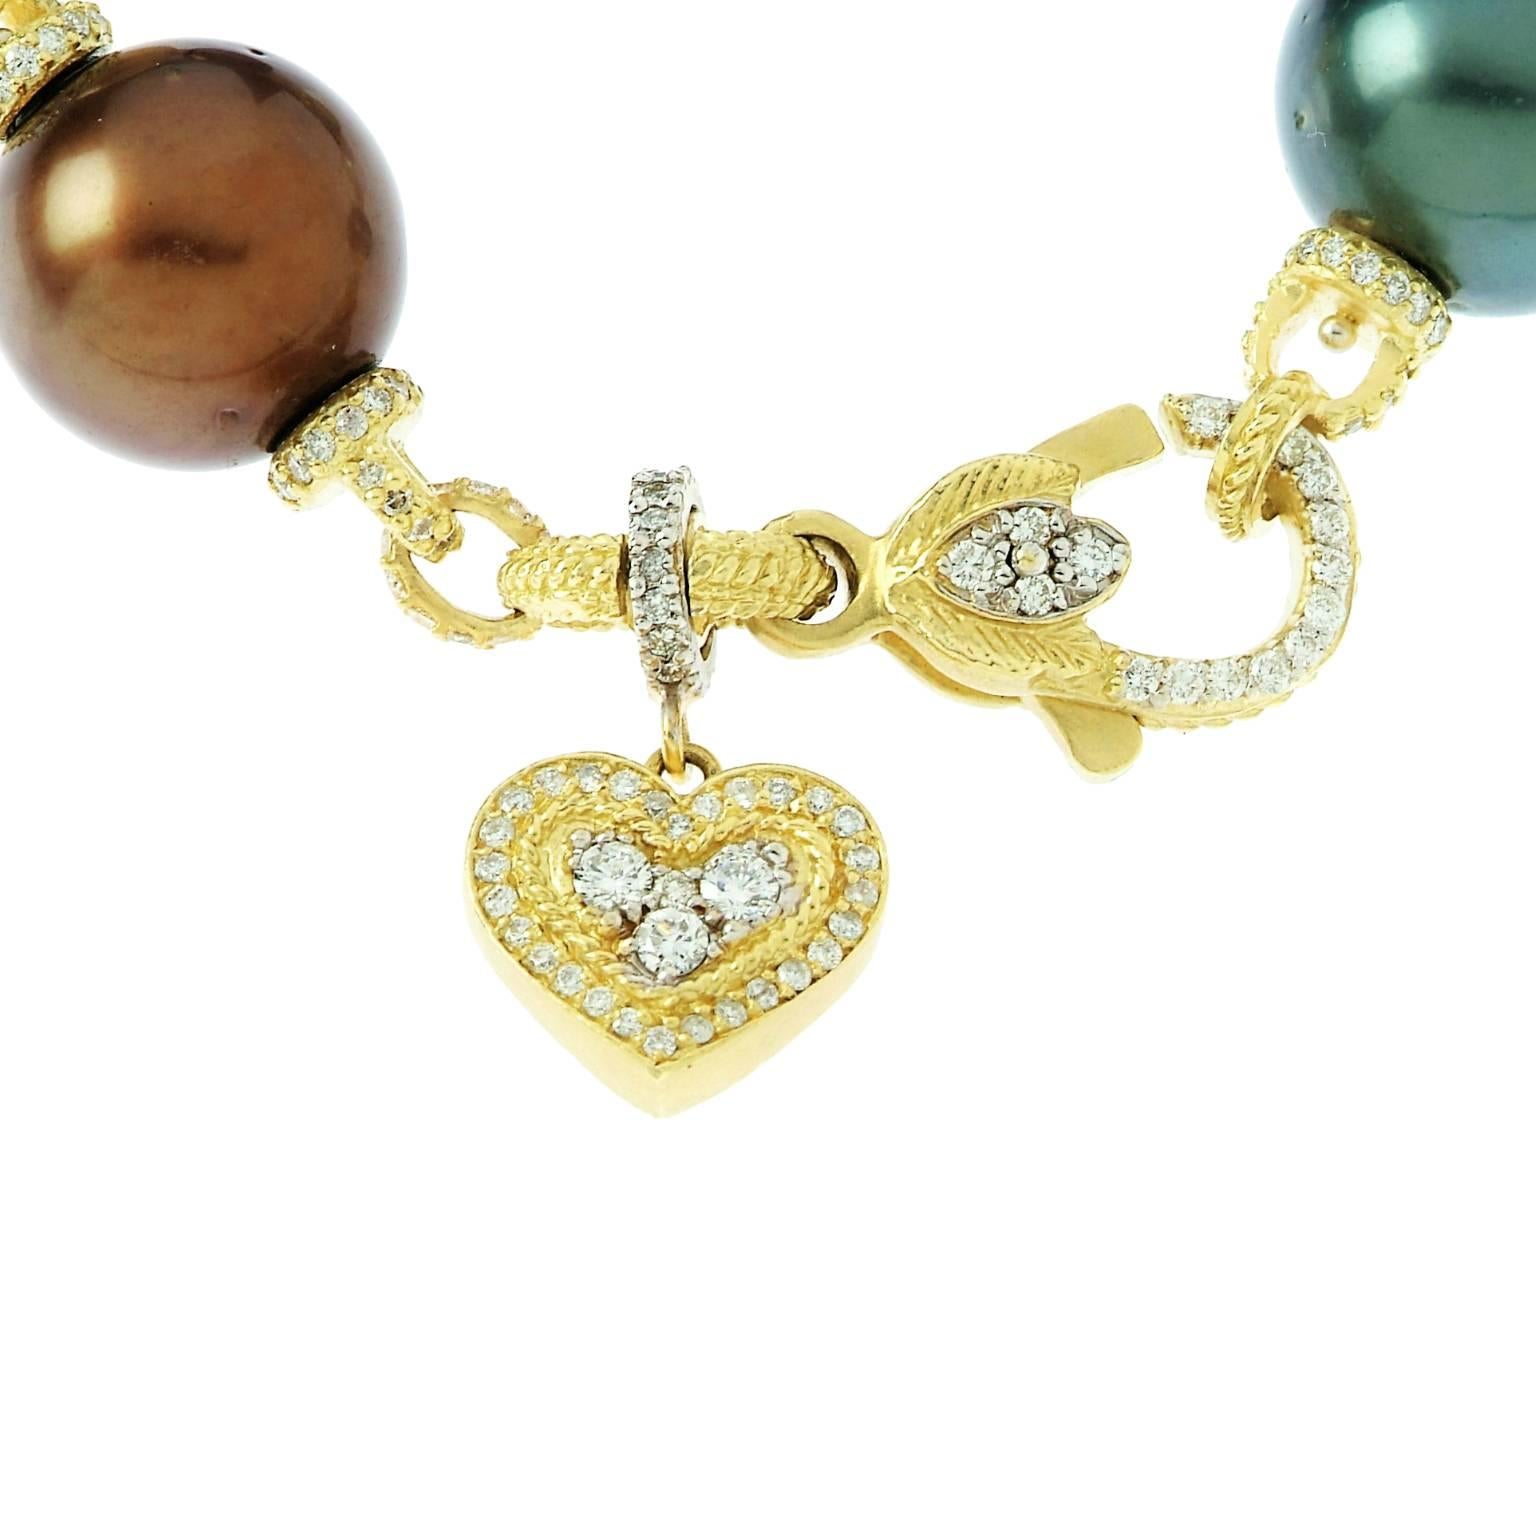 18K Gold Bracelet with South Sea Pearls and diamonds with dangling heart by Stambolian
  
Diamond links in between each pearl 

3.96ct. G Color VS clarity diamonds  

Six, 14mm, South Sea Pearls AAA Quality 
 
Entire piece is covered in diamonds,